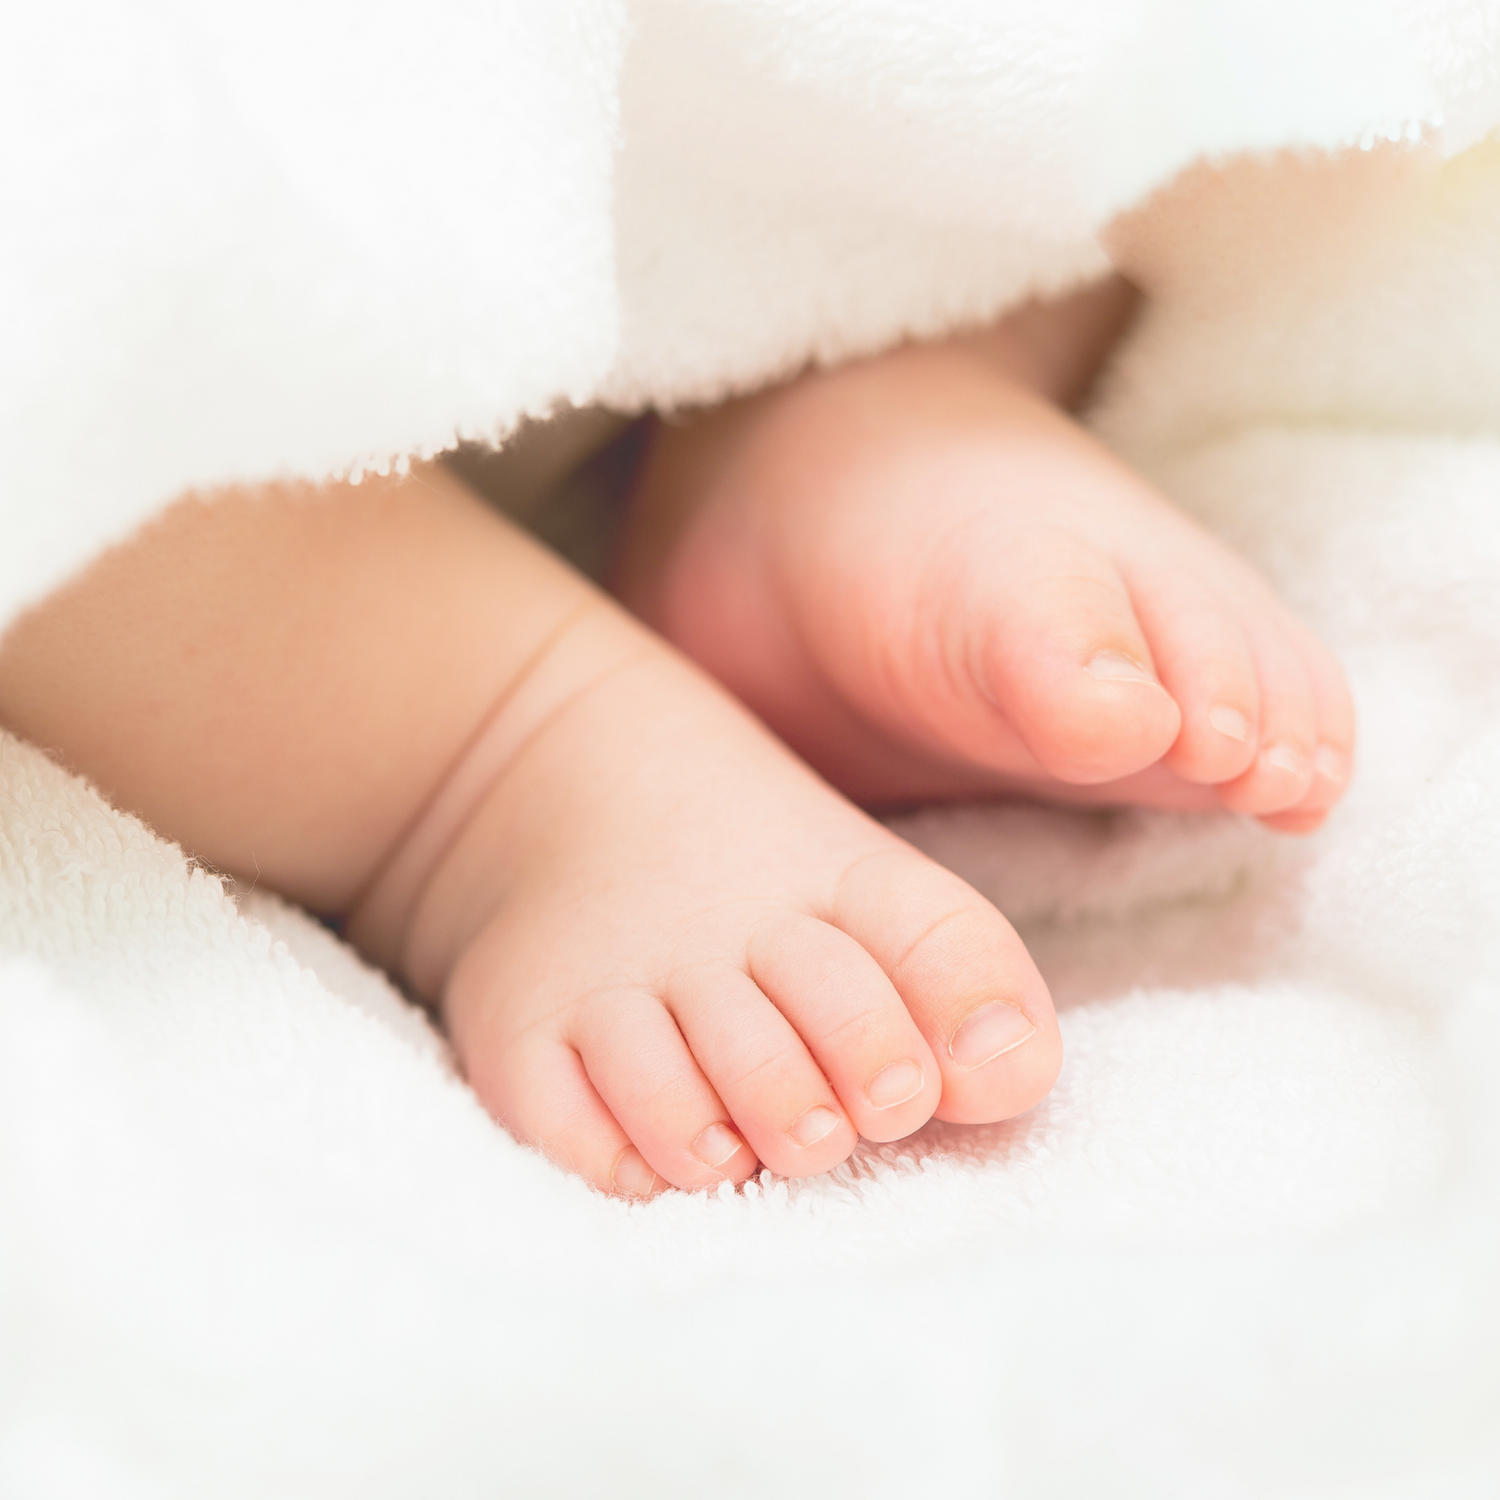 Keeping Your Little One Cosy: A Guide to Safe and Warm Sleep in the Colder Months